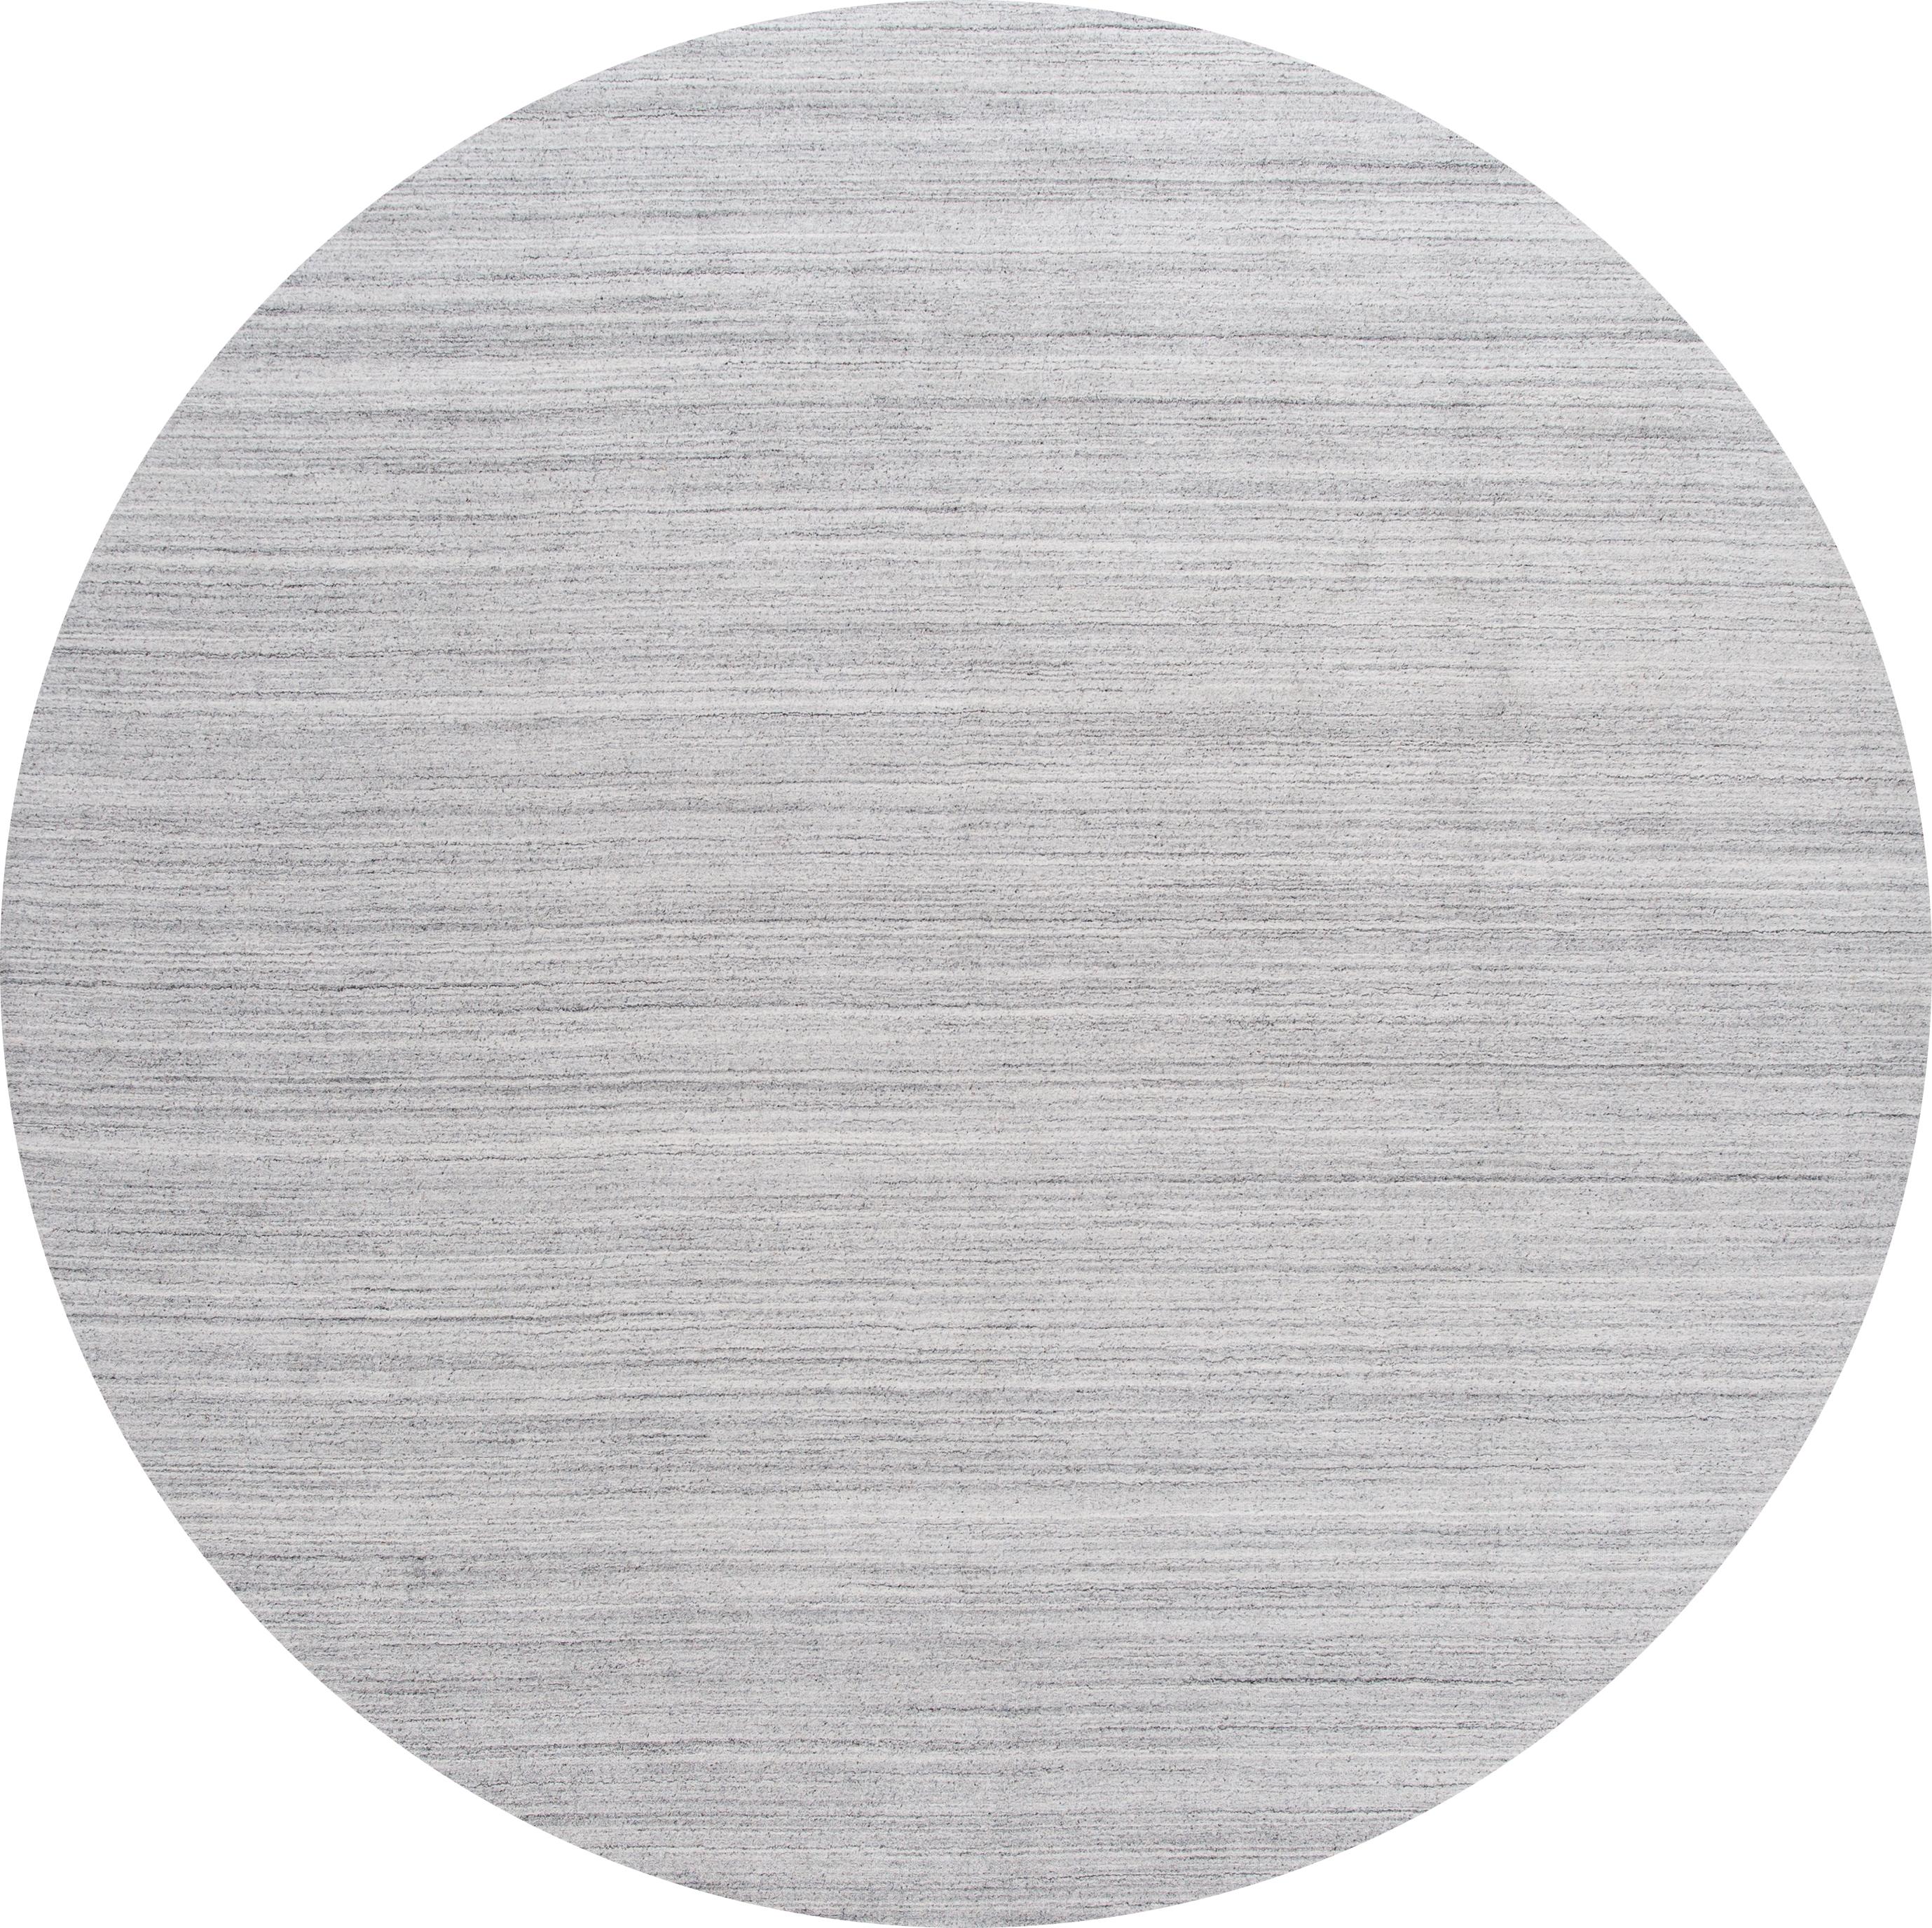 Beautiful 21st century solid rug, hand knotted wool with a gray field, subtle stripe accents in a solid design.
This rug measures: 10